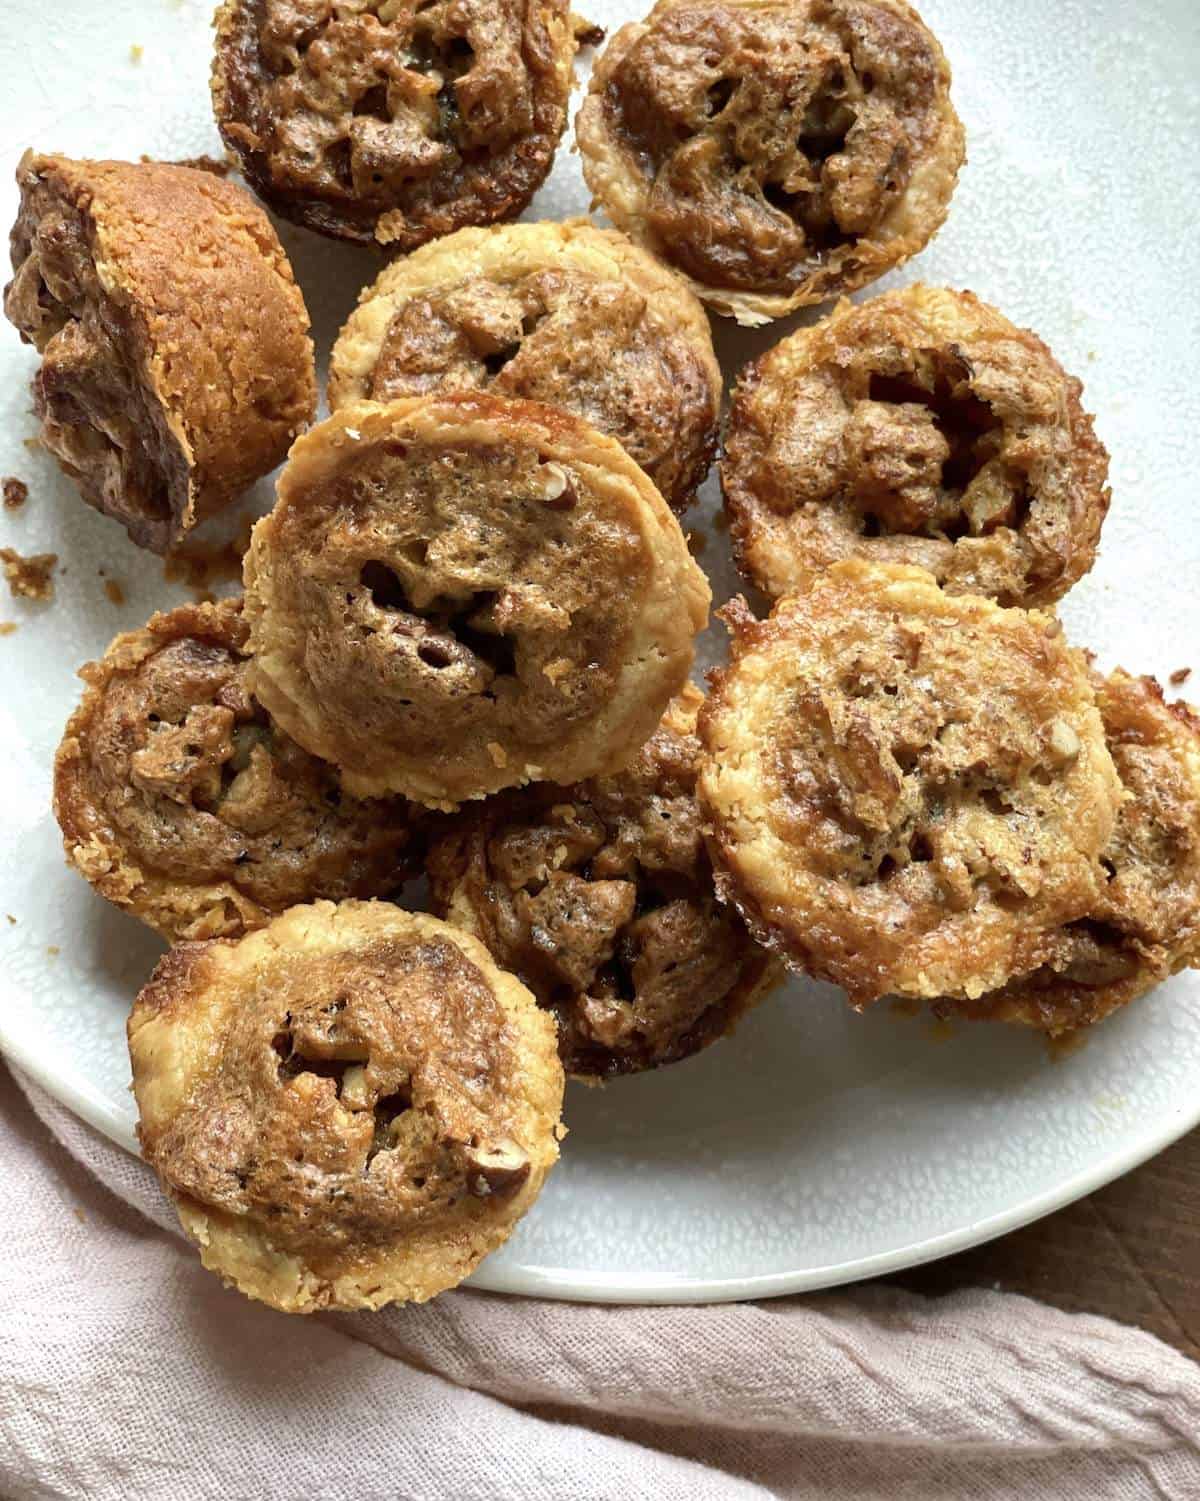 A pile of pecan pie tartlets on a white plate.